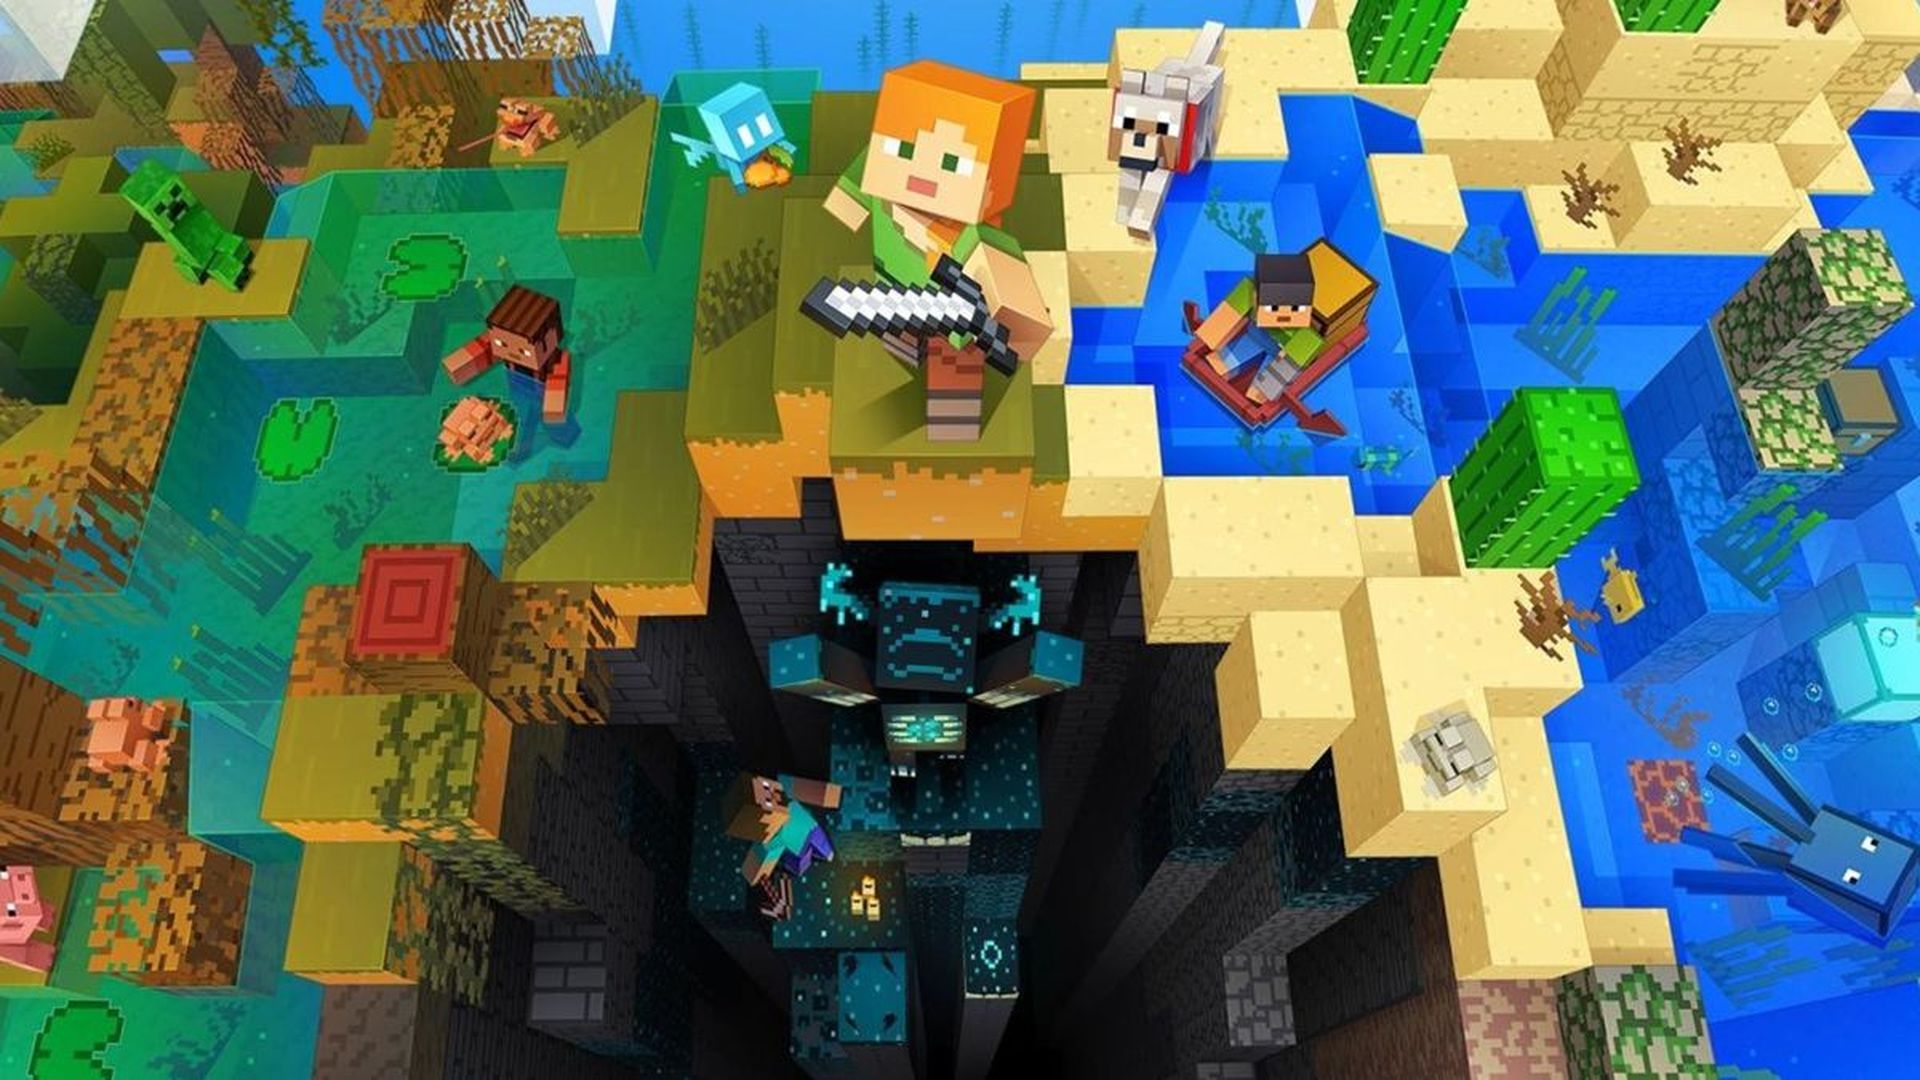 Minecraft is the most popular video game of all time